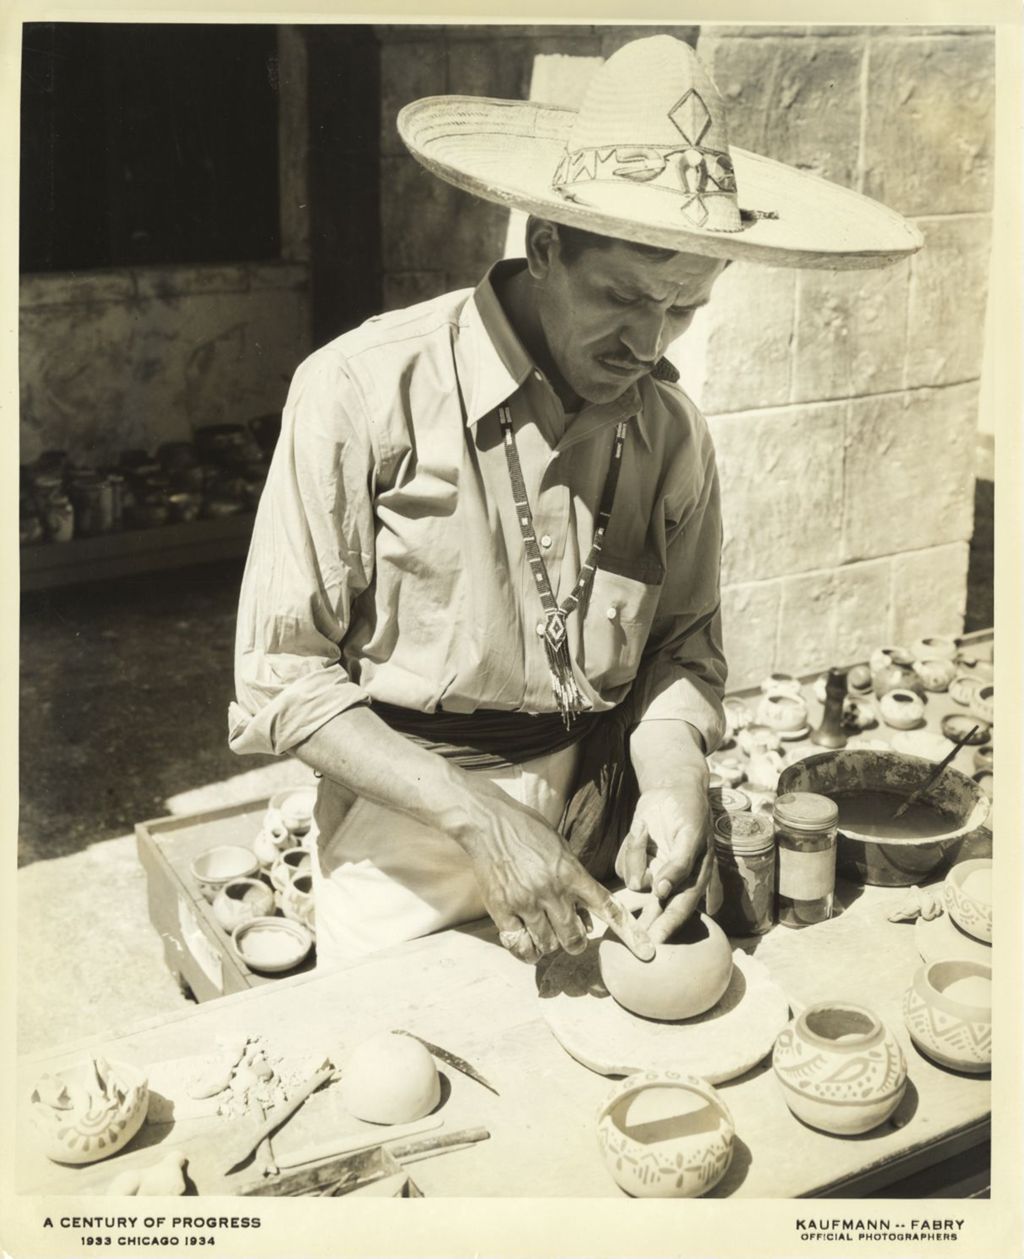 Miniature of Pottery artist working at the Century of Progress Mexican Village.